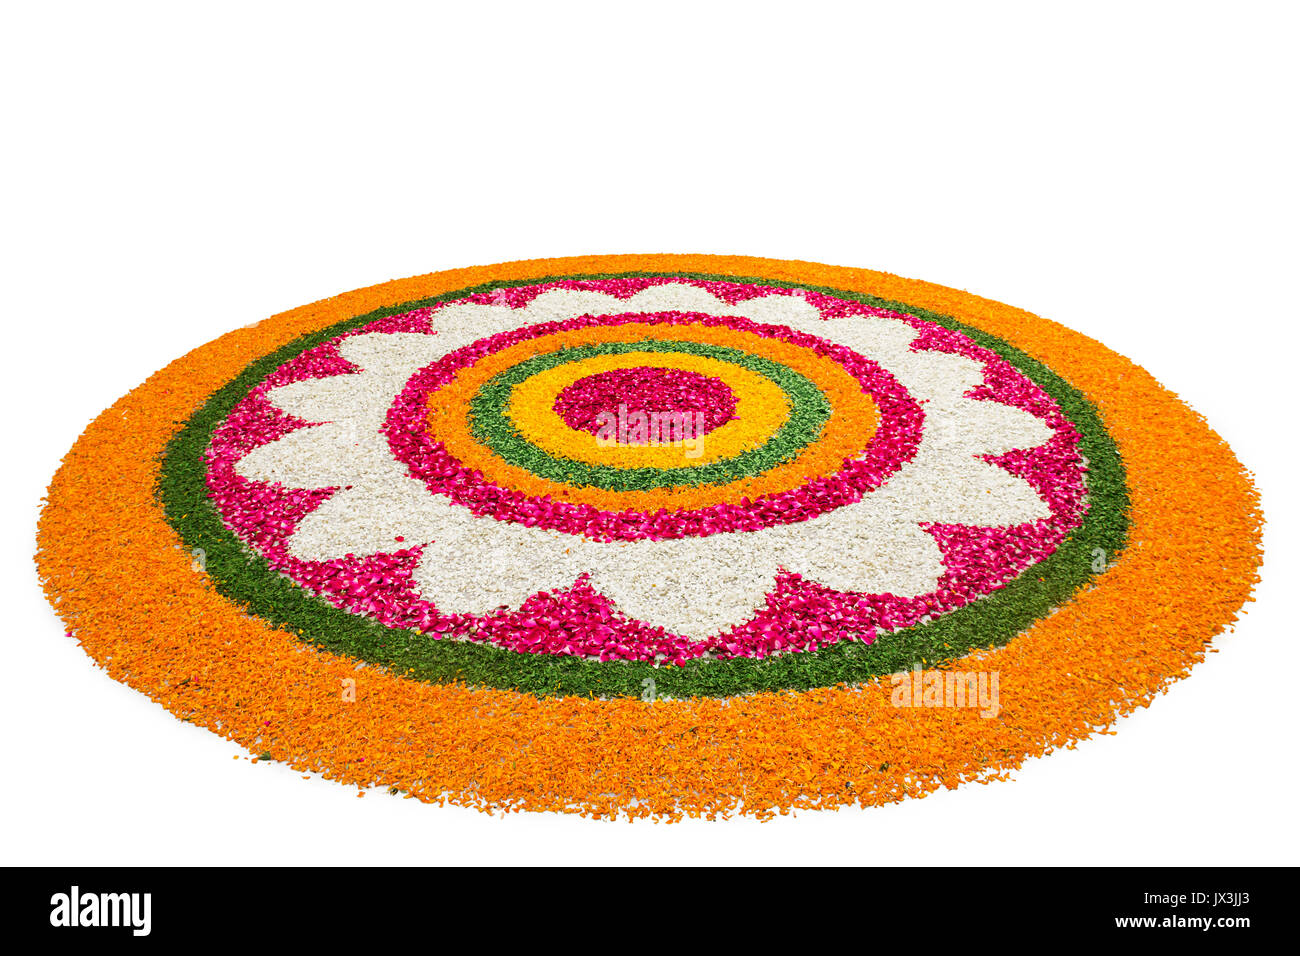 Flowers Rangoli Designs and Patterns for Diwali Festival India ...